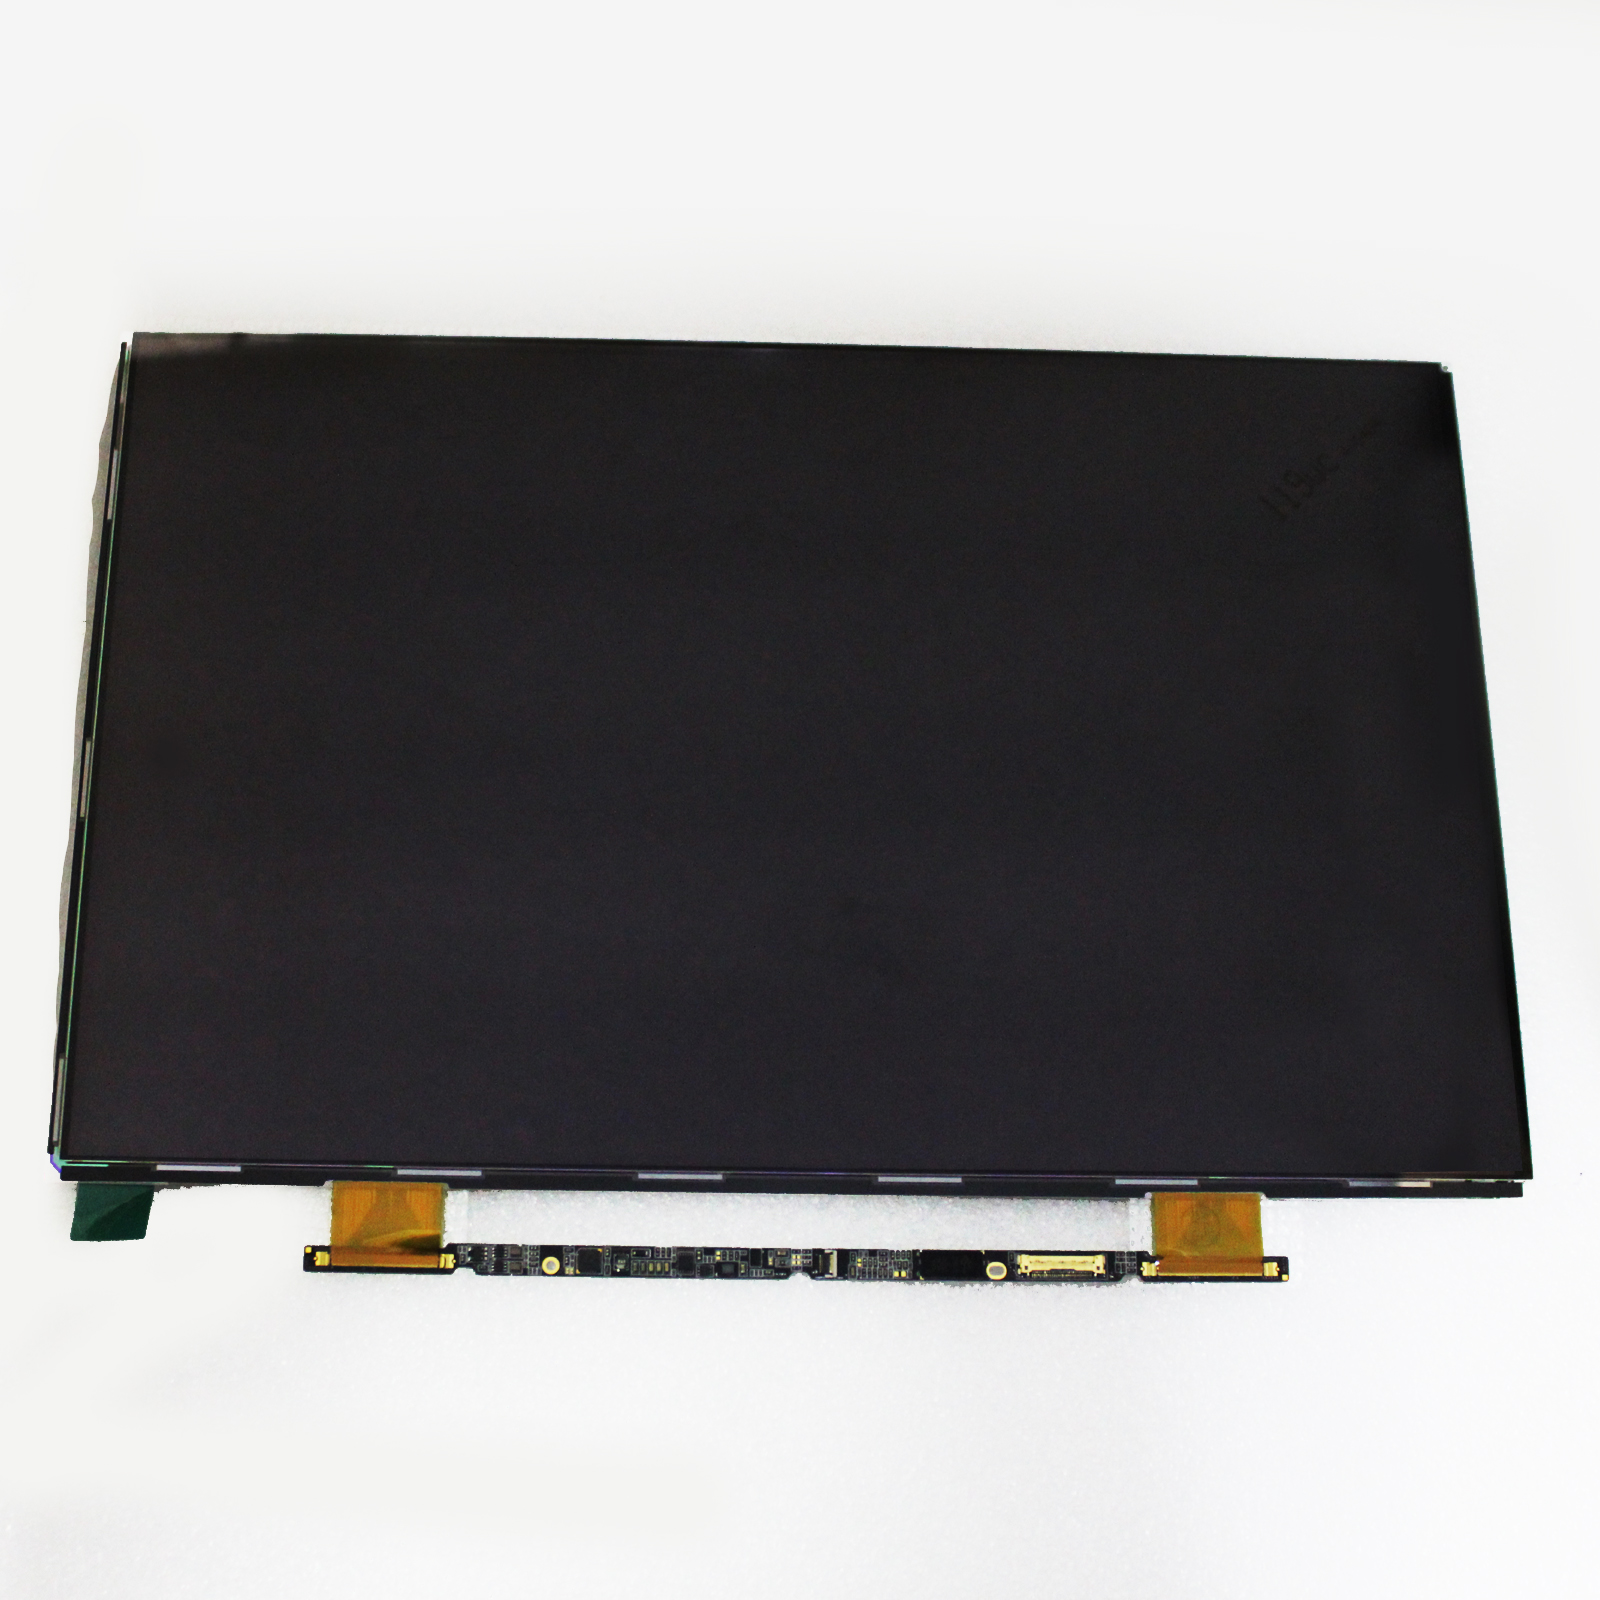 Kreplacement FOR MACBOOK AIR 13\" A1369 A1466 SCREEN LED LCD panel display LSN133BT01-A01 LTH133BT01 LP133WP1 TJA1 A3